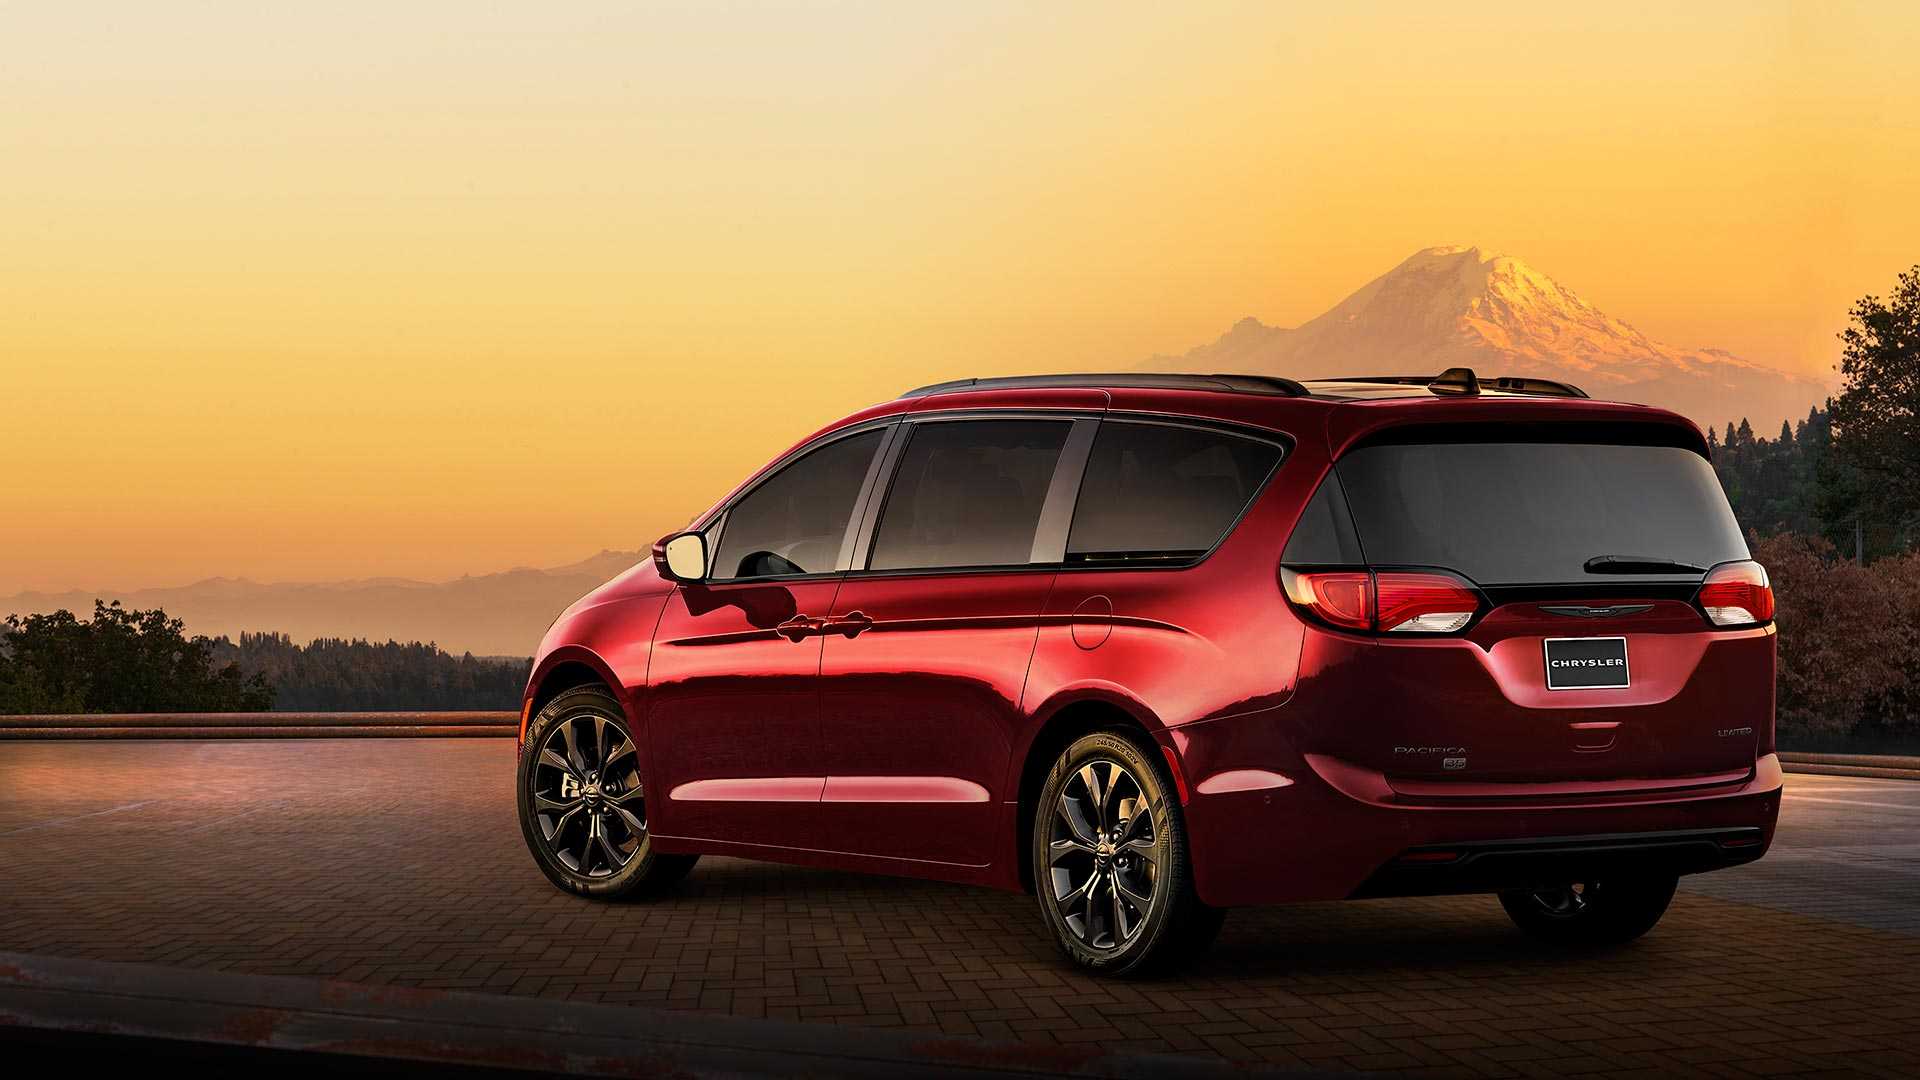 Chrysler Pacifica Awd Expected In Q2 2020 With Plug In Hybrid Powertrain Autoevolution